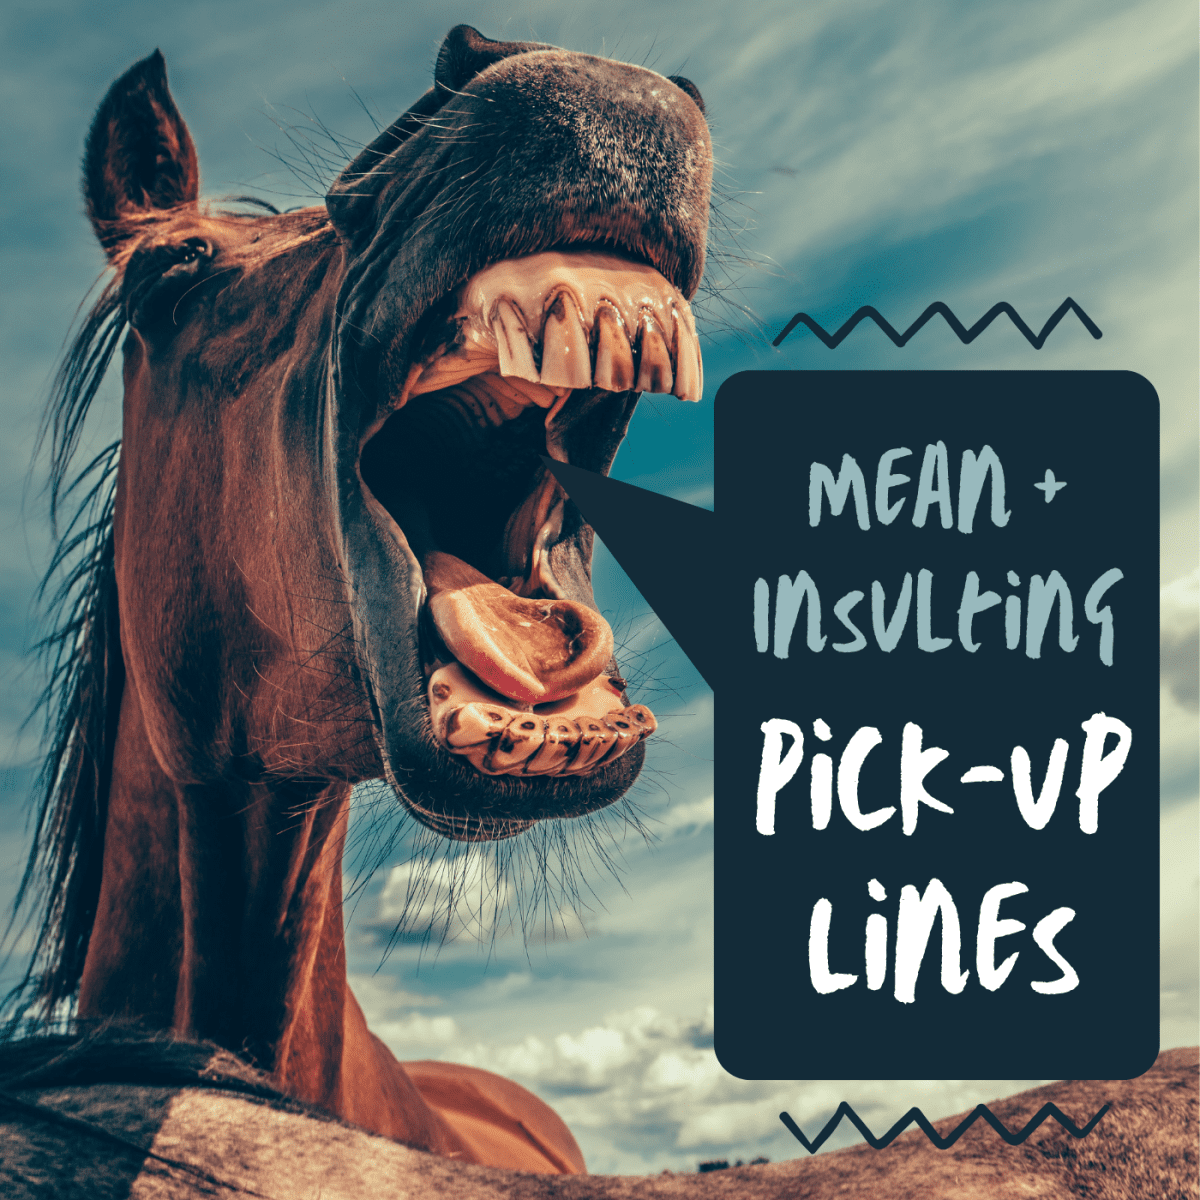 100+ Mean and Insulting Pick-Up Lines - PairedLife